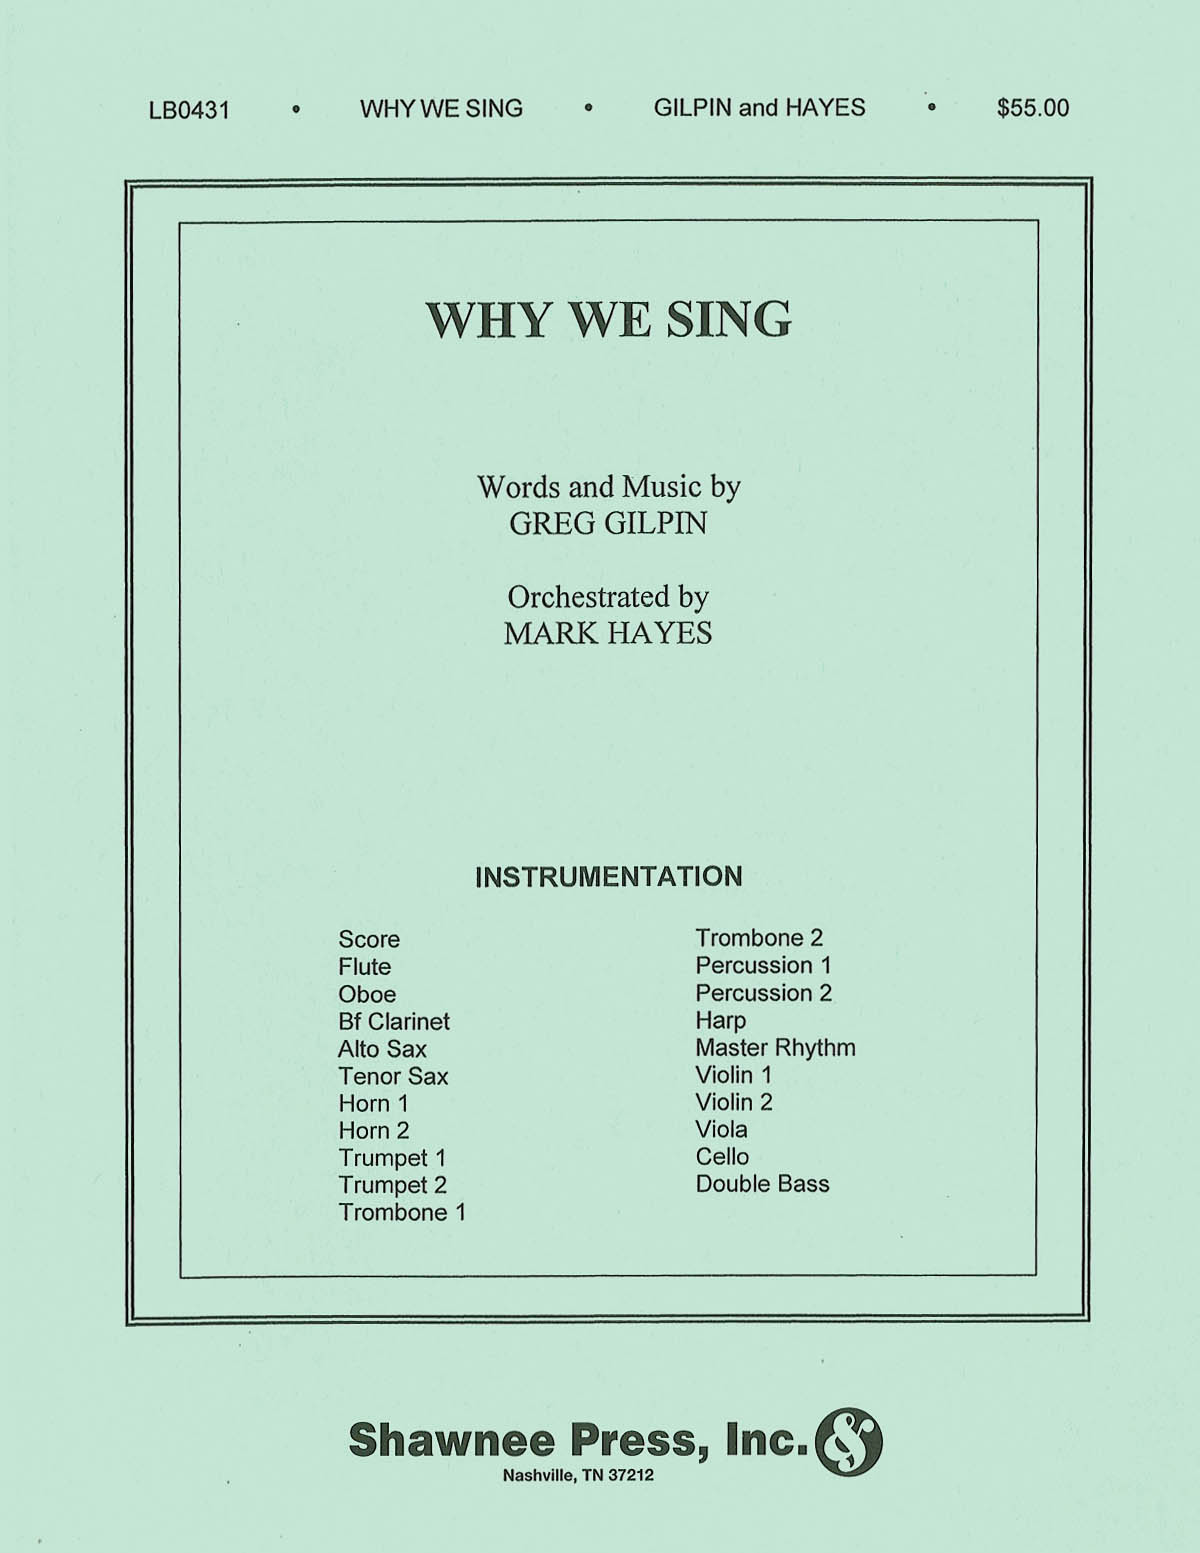 Greg Gilpin: Why We Sing: Orchestra: Parts